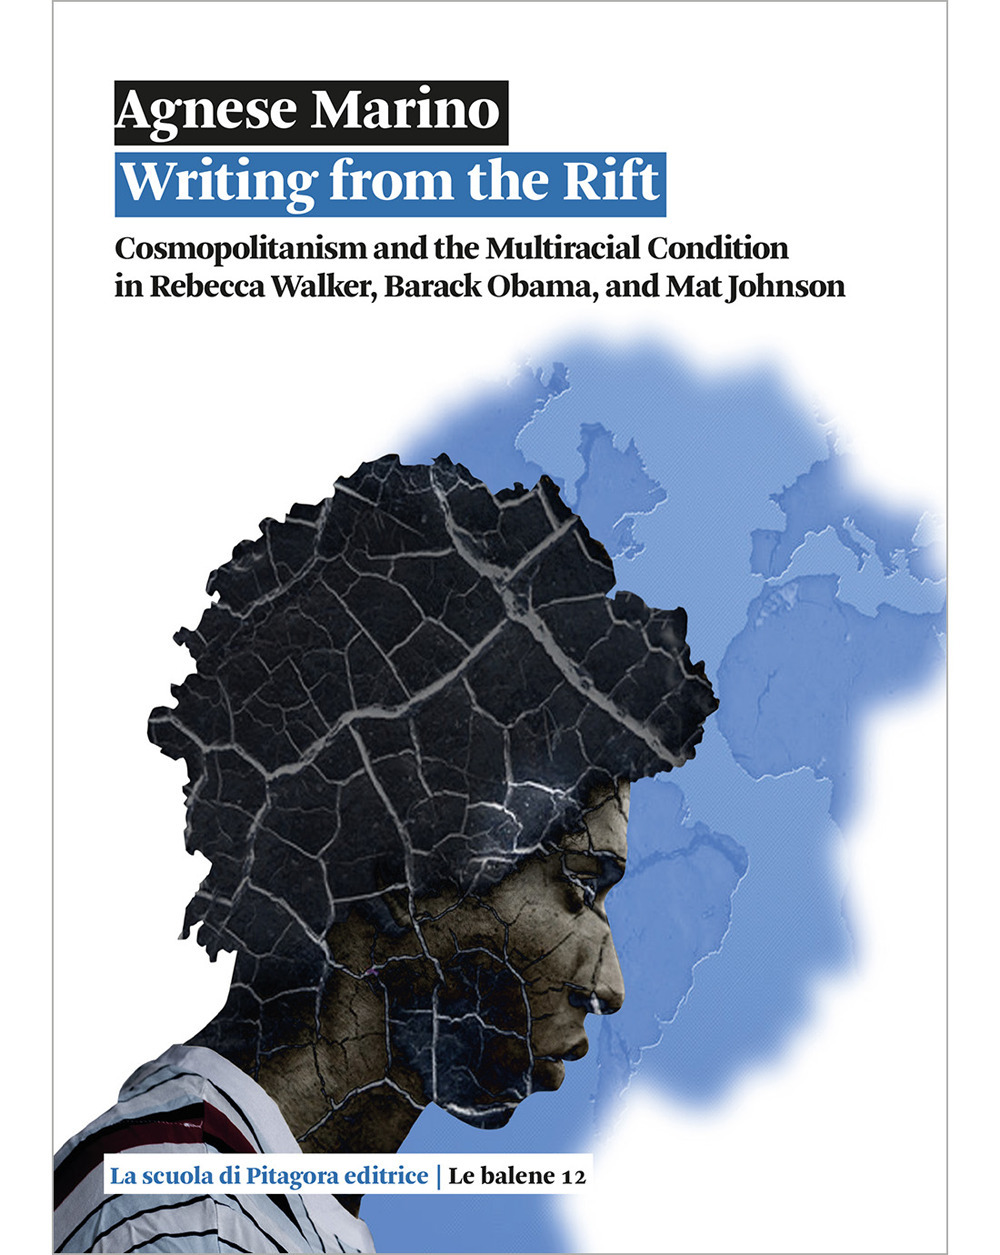 Writing from the Rift. Cosmopolitanism and the Multiracial Condition in Rebecca Walker, Barack Obama, and Mat Johnson